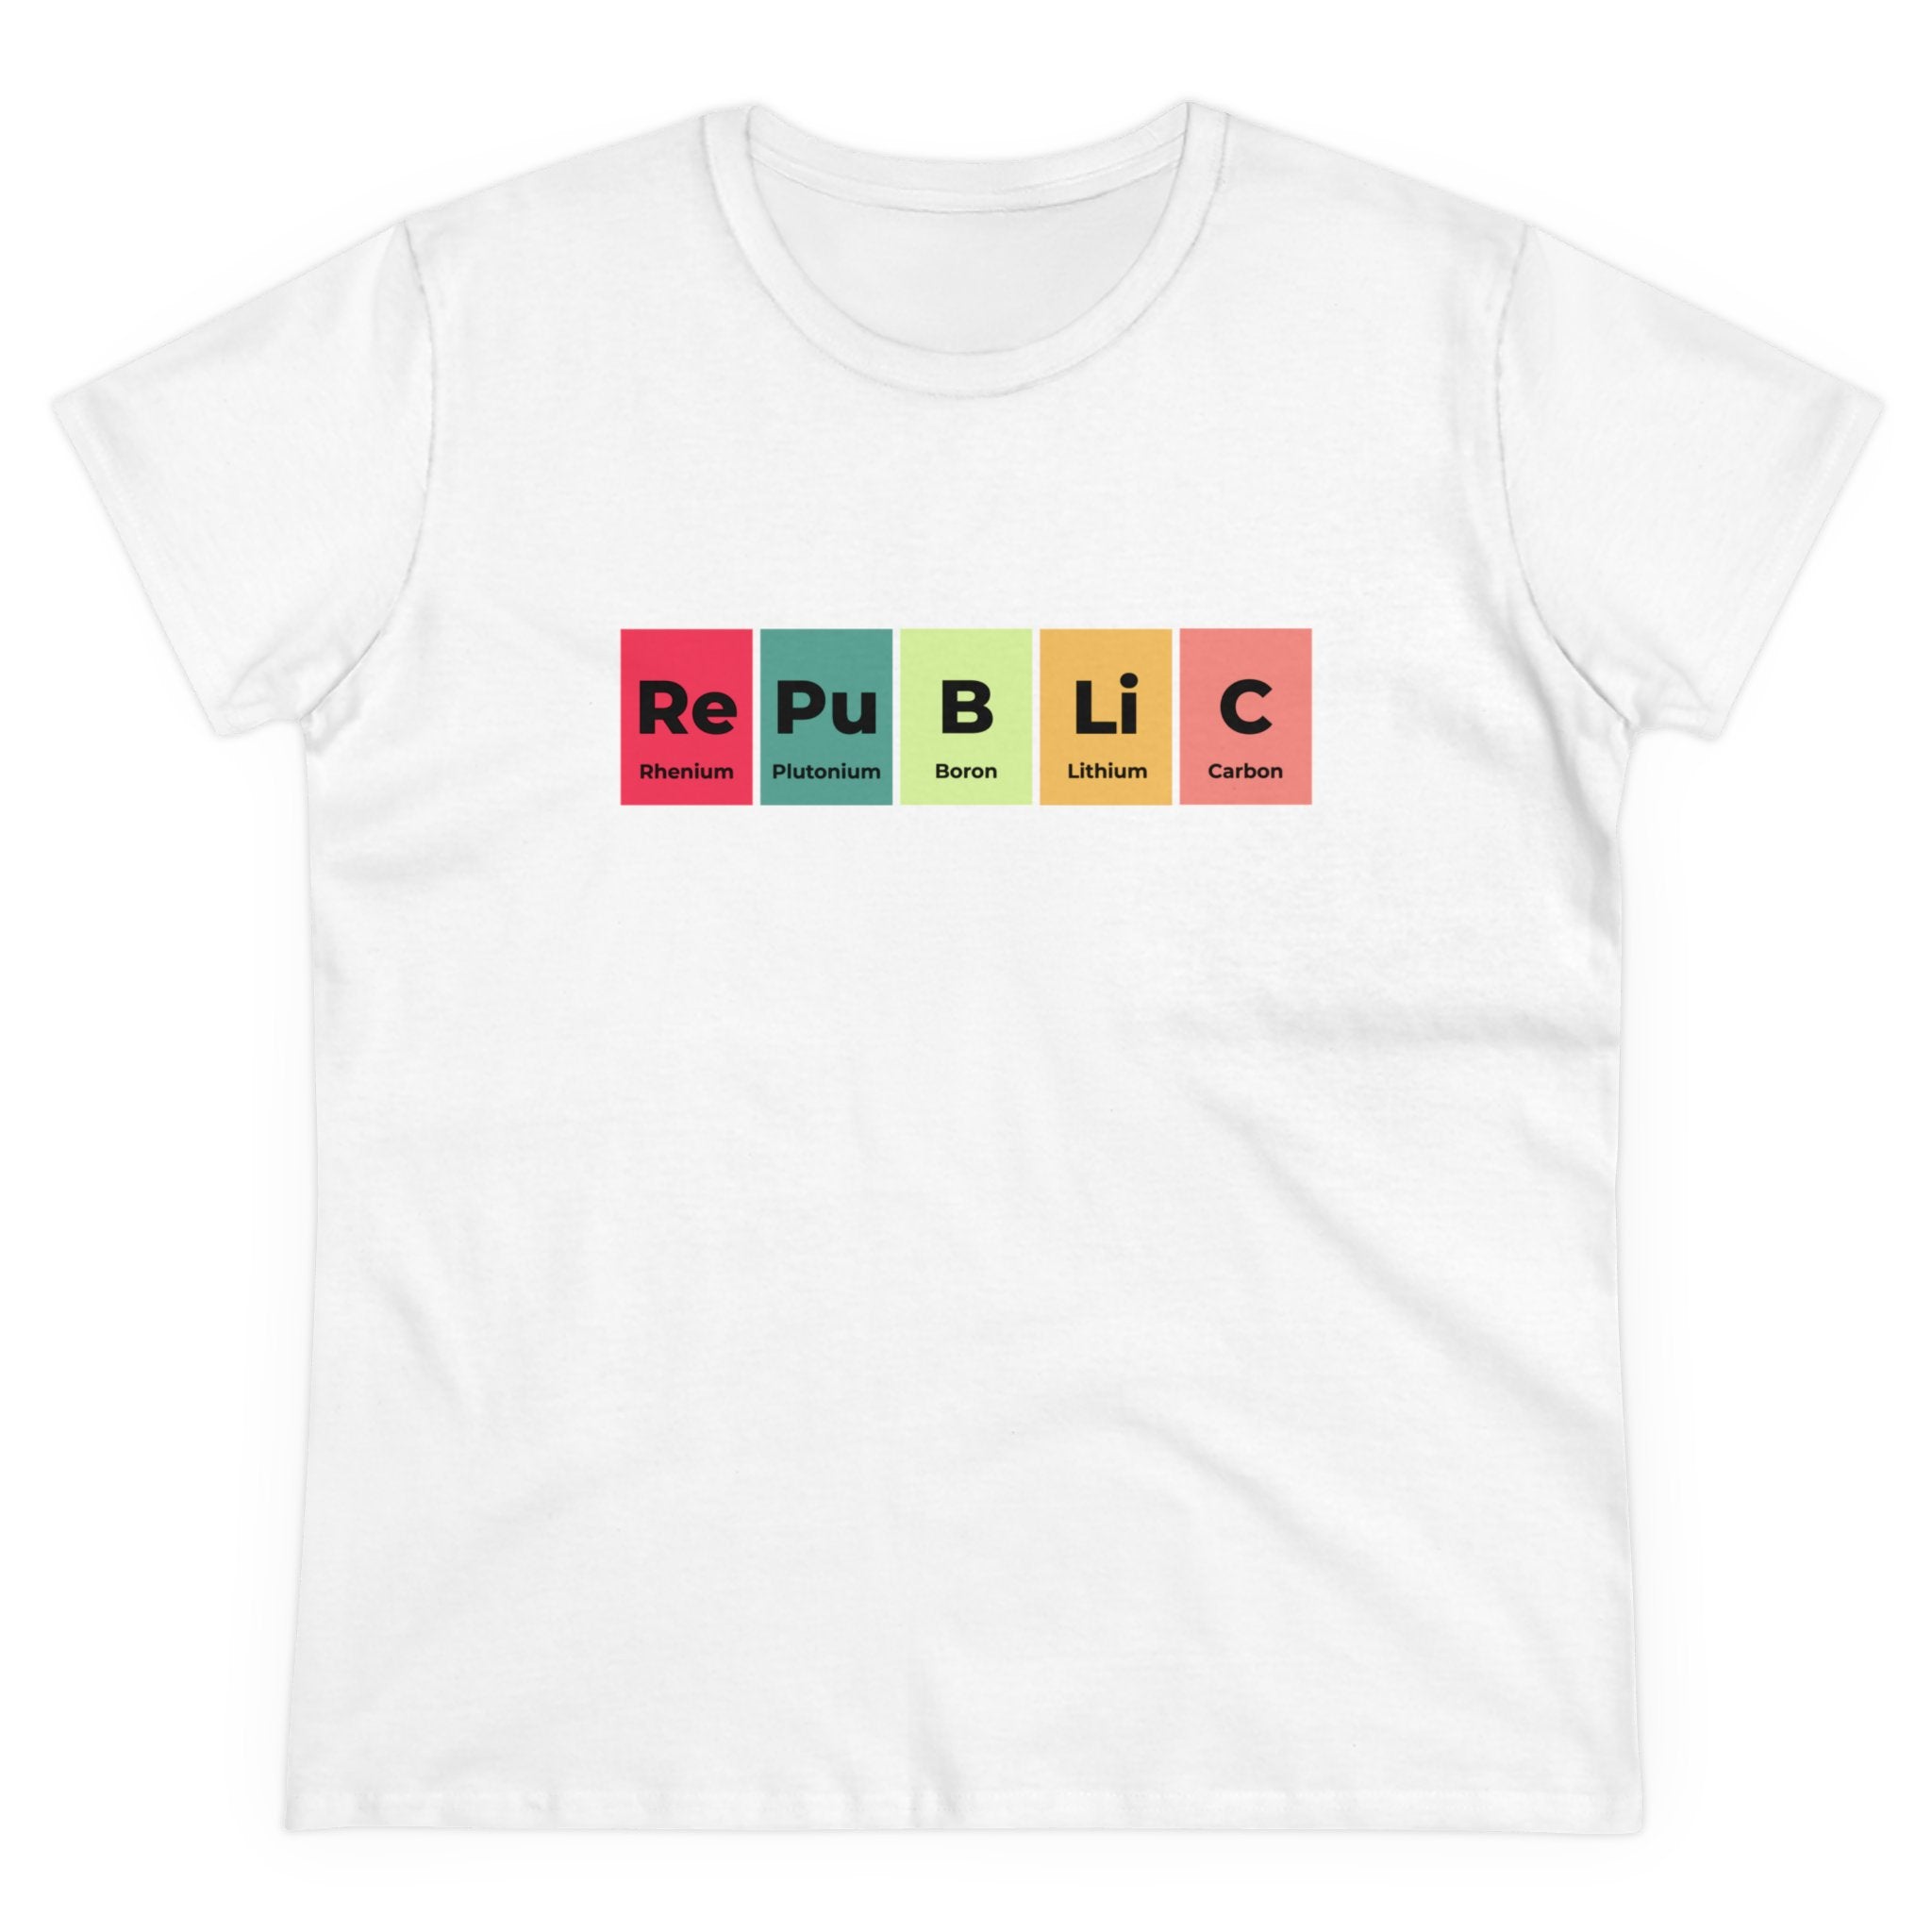 Fashionable white Republic - Women's Tee featuring the word "RePuBLiC" spelled out using periodic table element symbols: Rhenium, Plutonium, Boron, Lithium, and Carbon. Made from ethically grown US cotton.